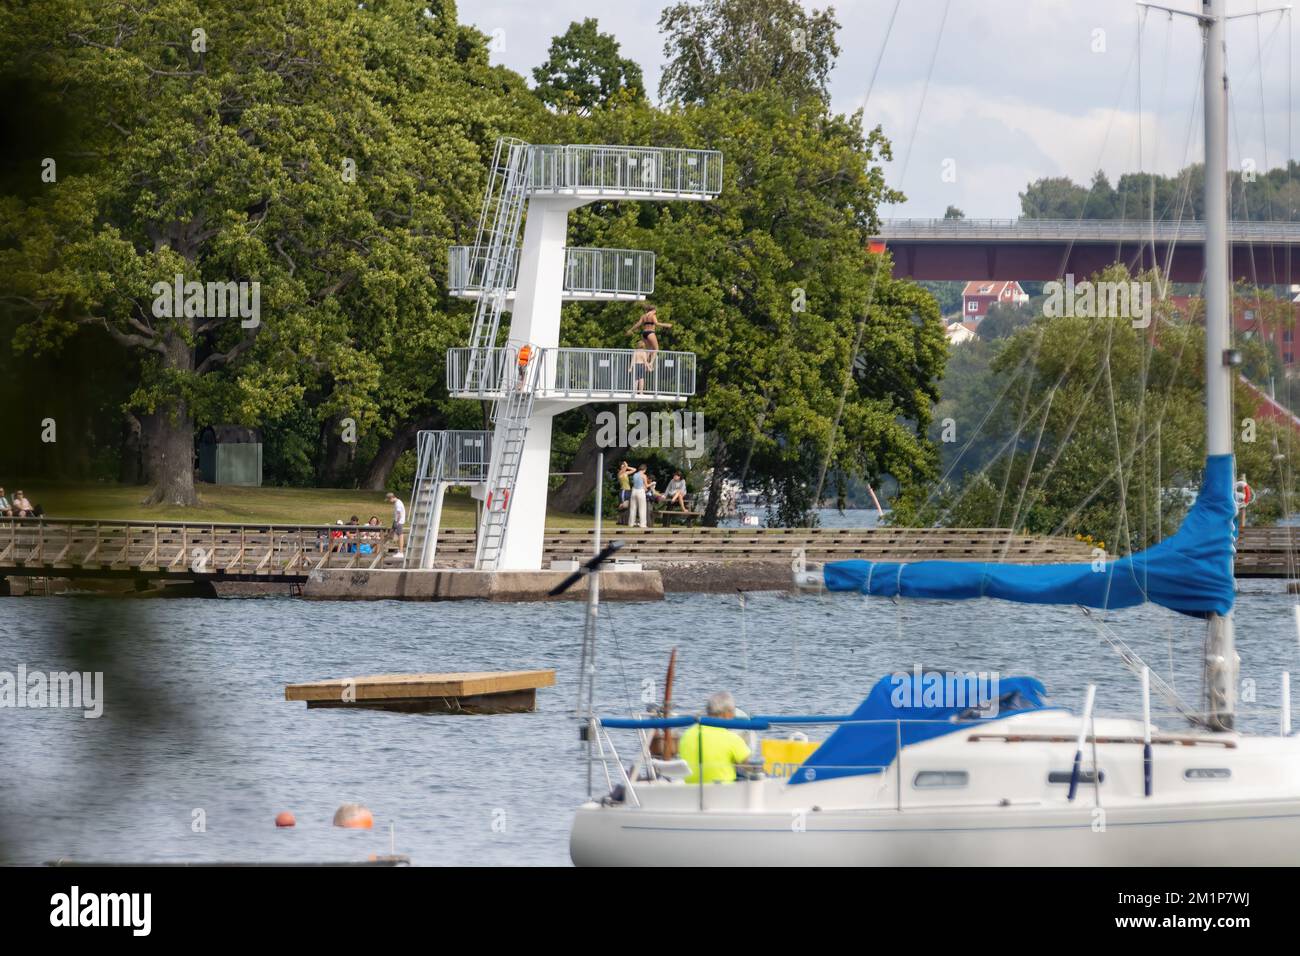 Motala Sweden August 2022 Jumping tower with four height levels of 3m, 5m, 7m and 10m and jump into the fresh water lake Stock Photo